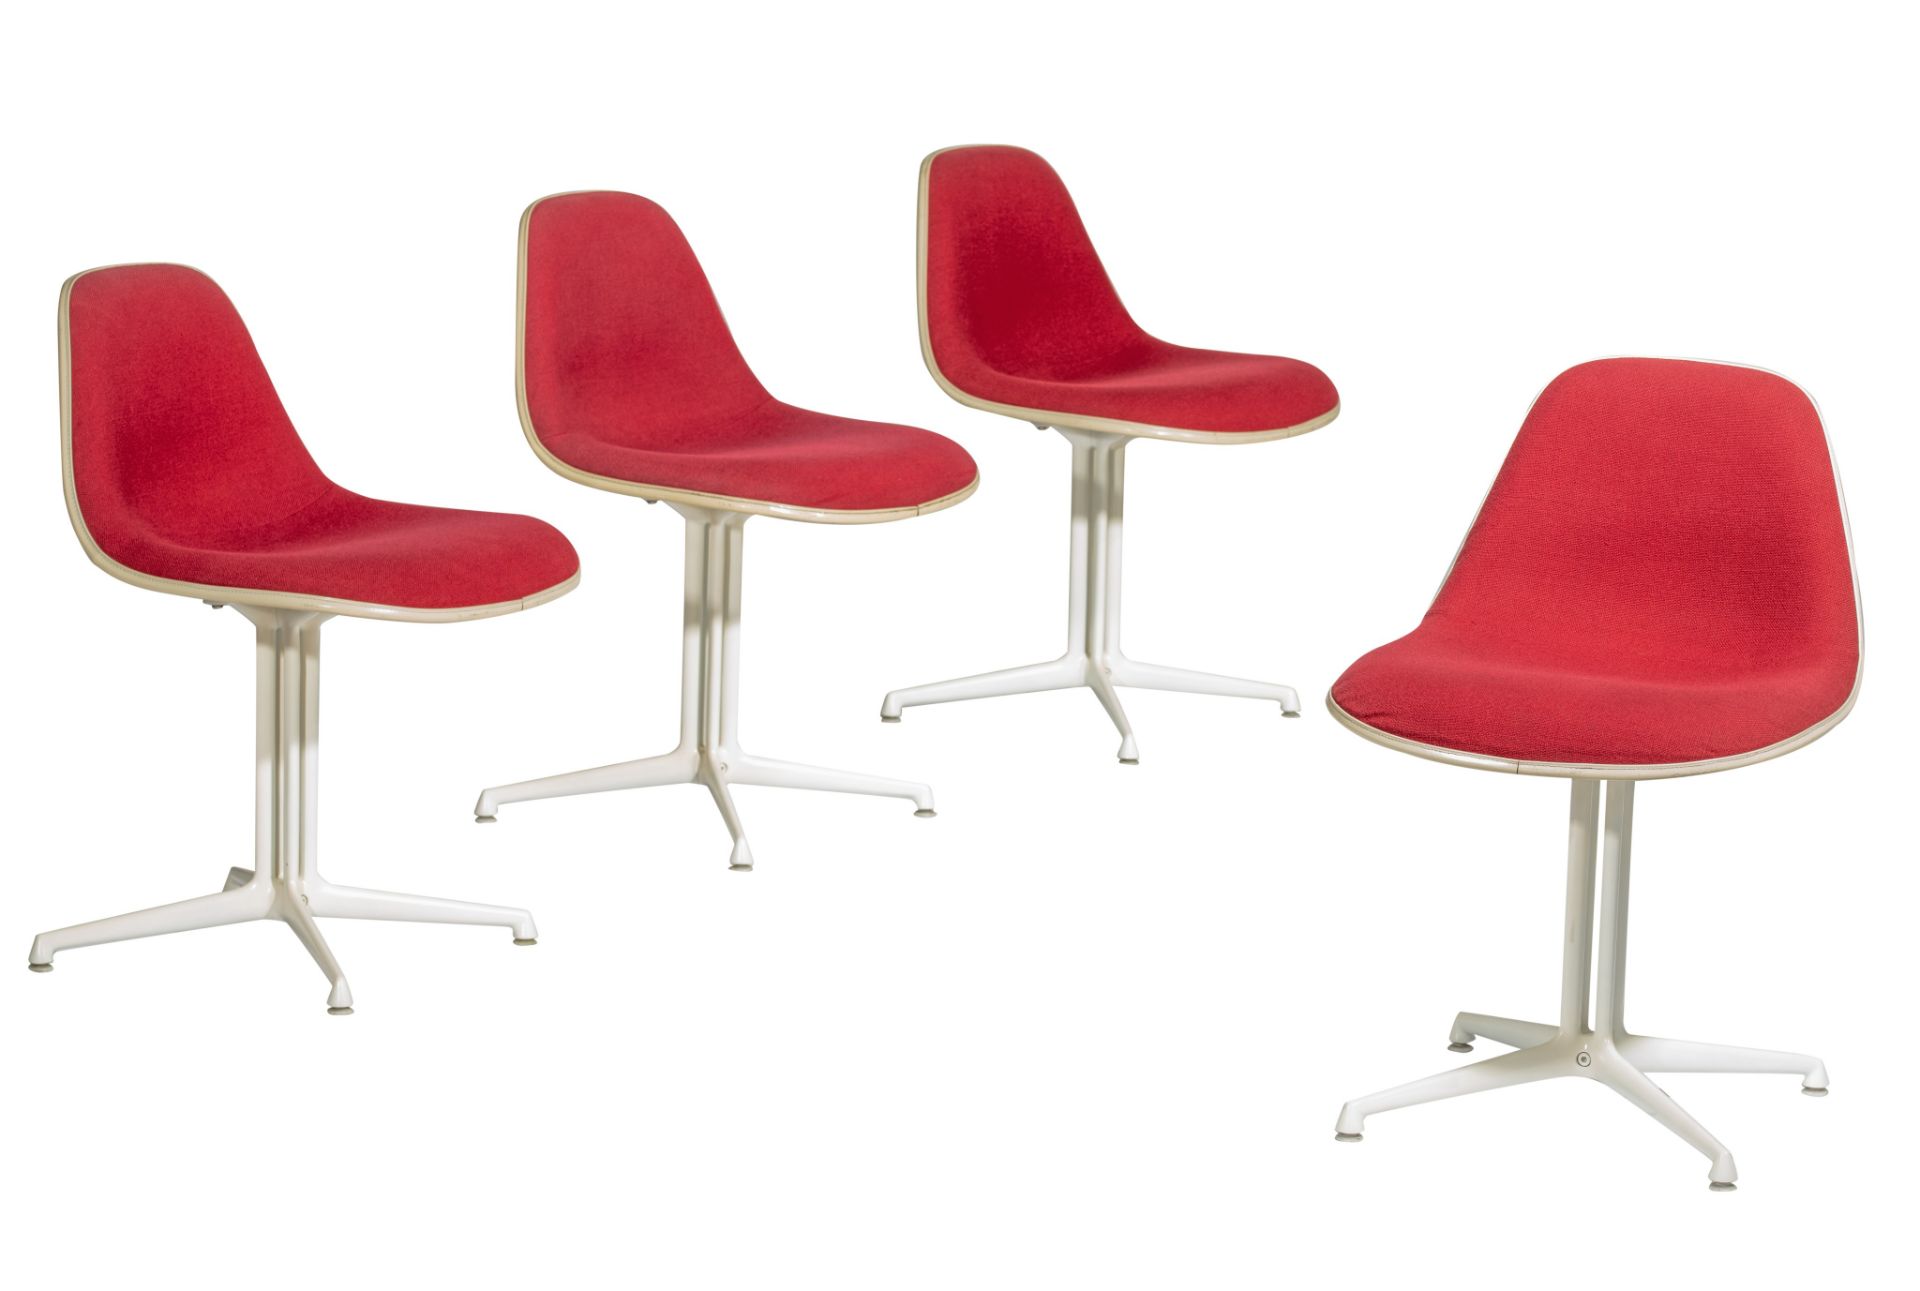 An exceptional set of 4 Eames fibreglass DSL chairs for Vitra, H 71 - W 48 cm